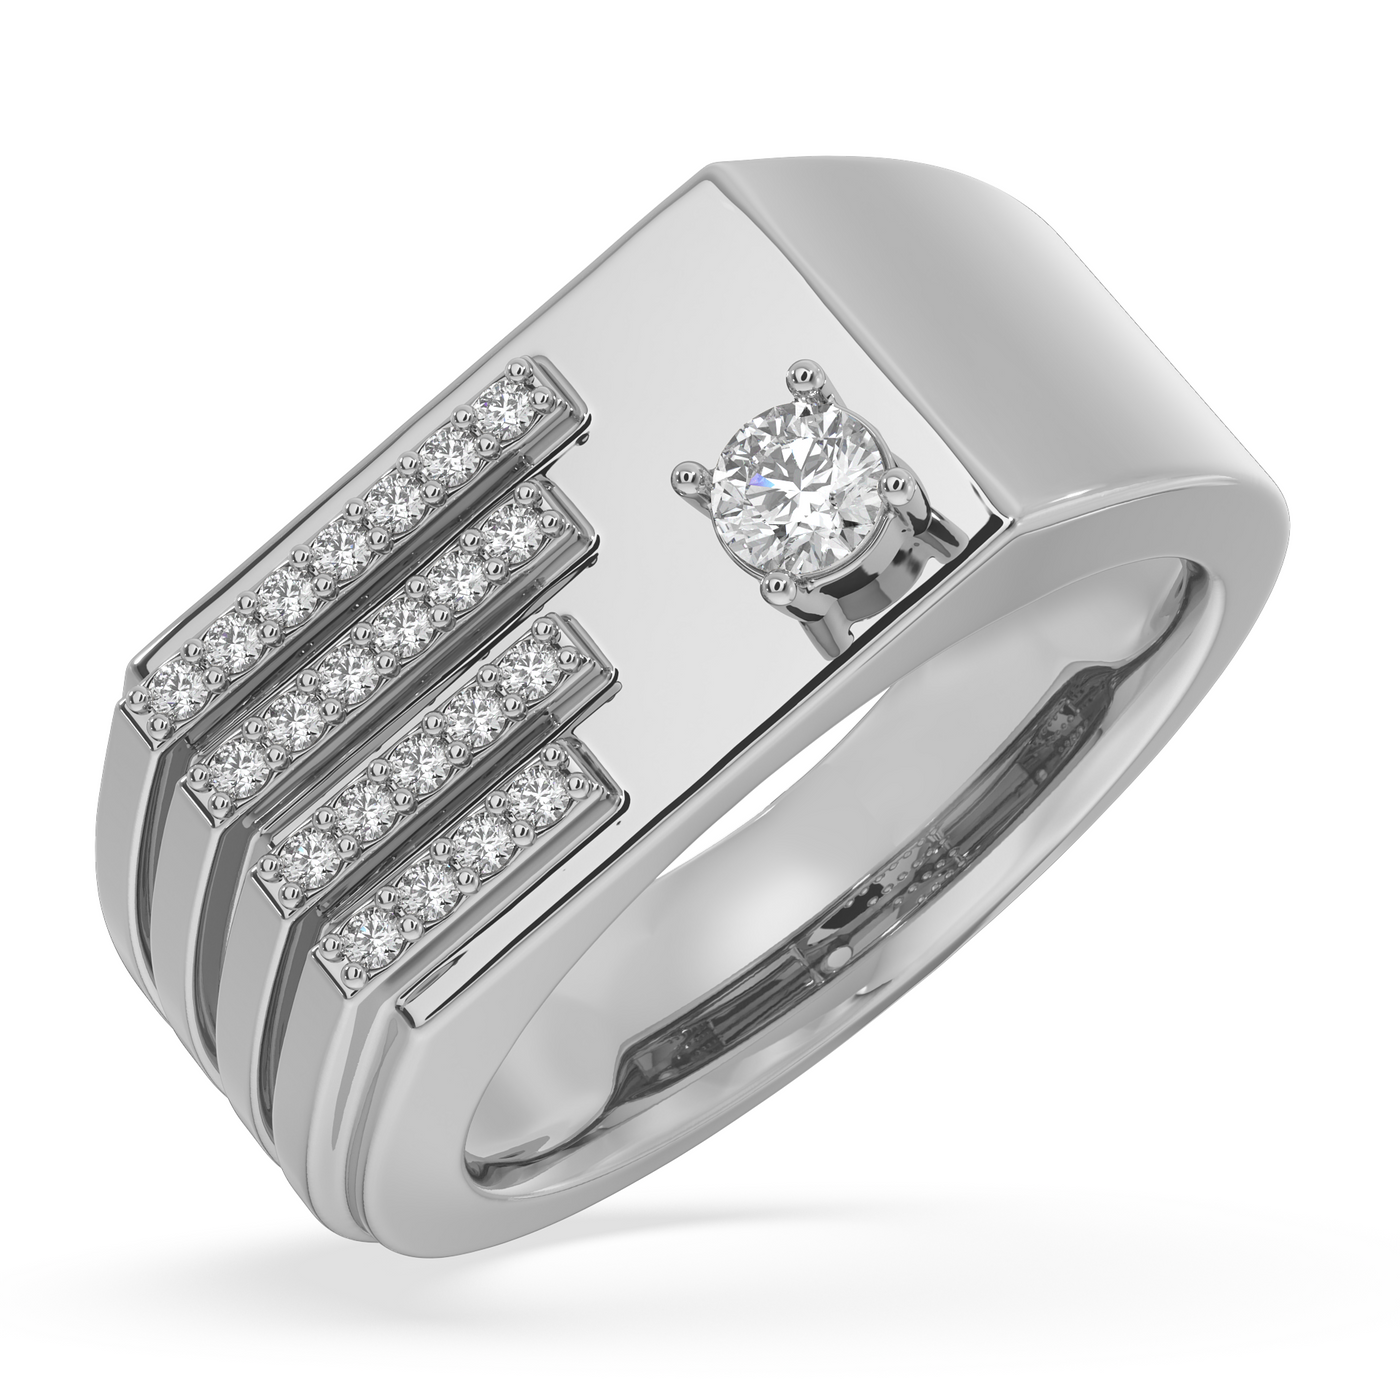 SY Men's Ring in Platinum, More Than Solitaire